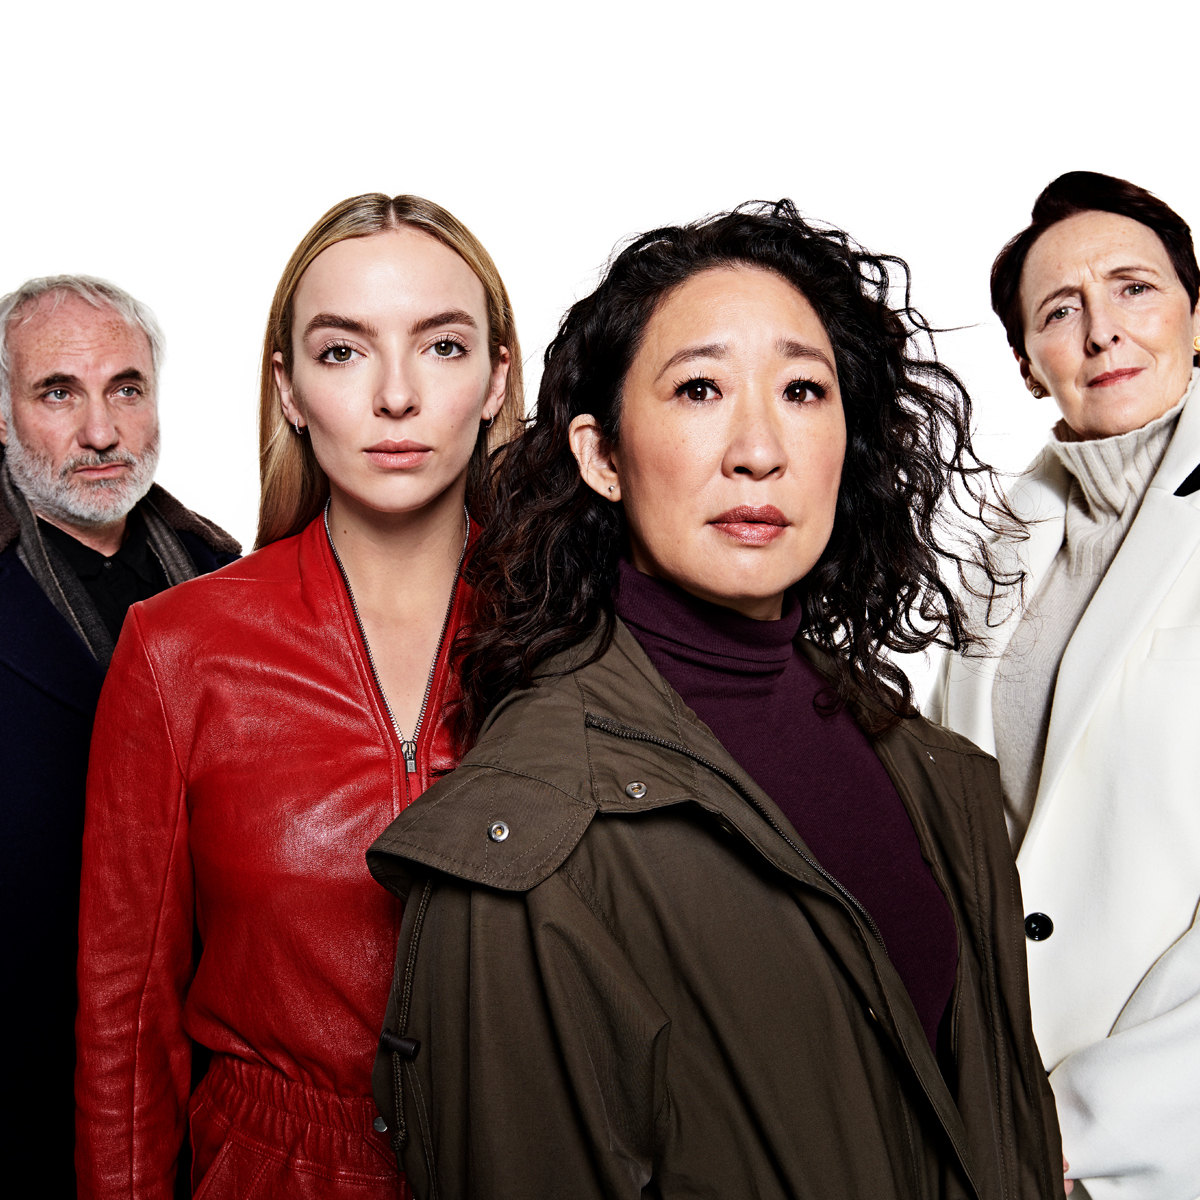 The Endgame' Is NBC's Comically Inept 'Killing Eve